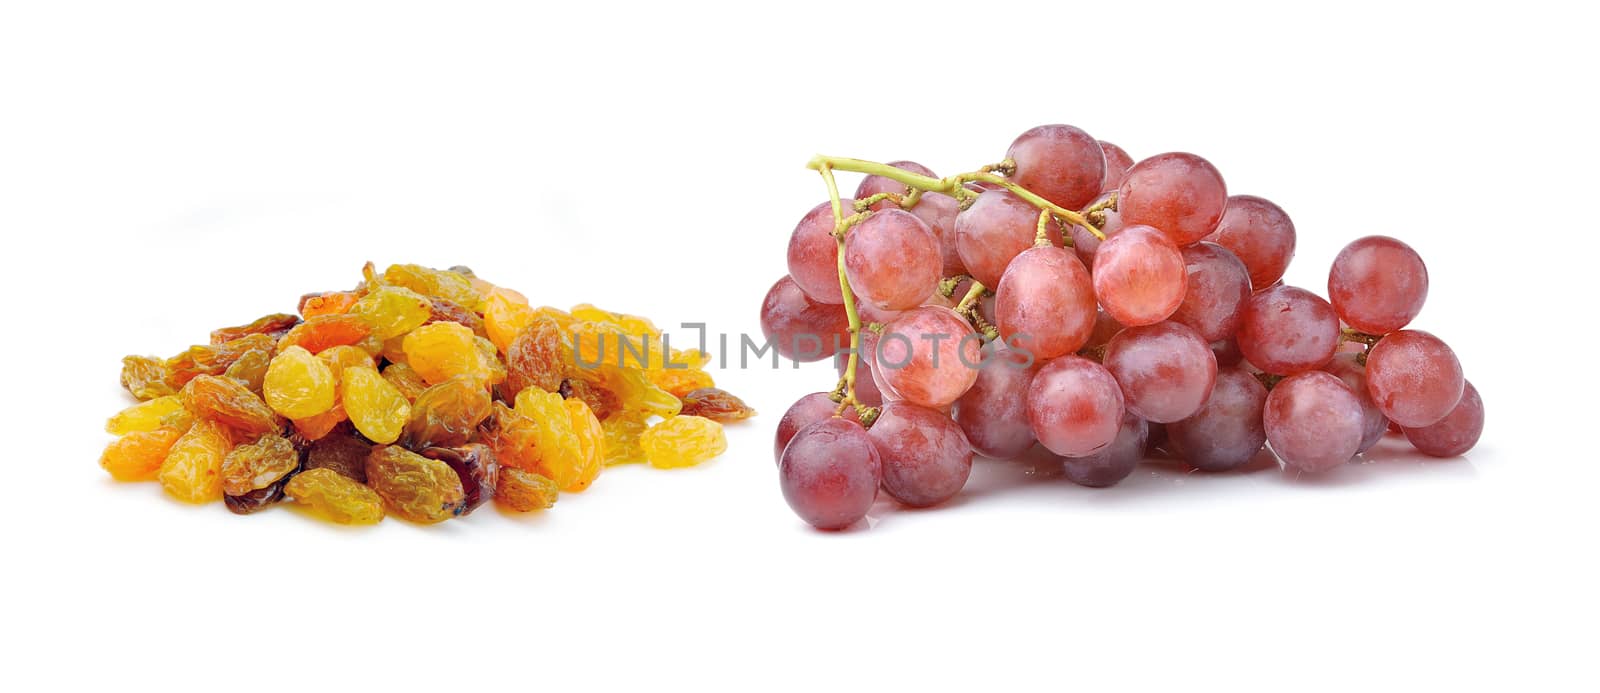 Grapes with raisins by sommai